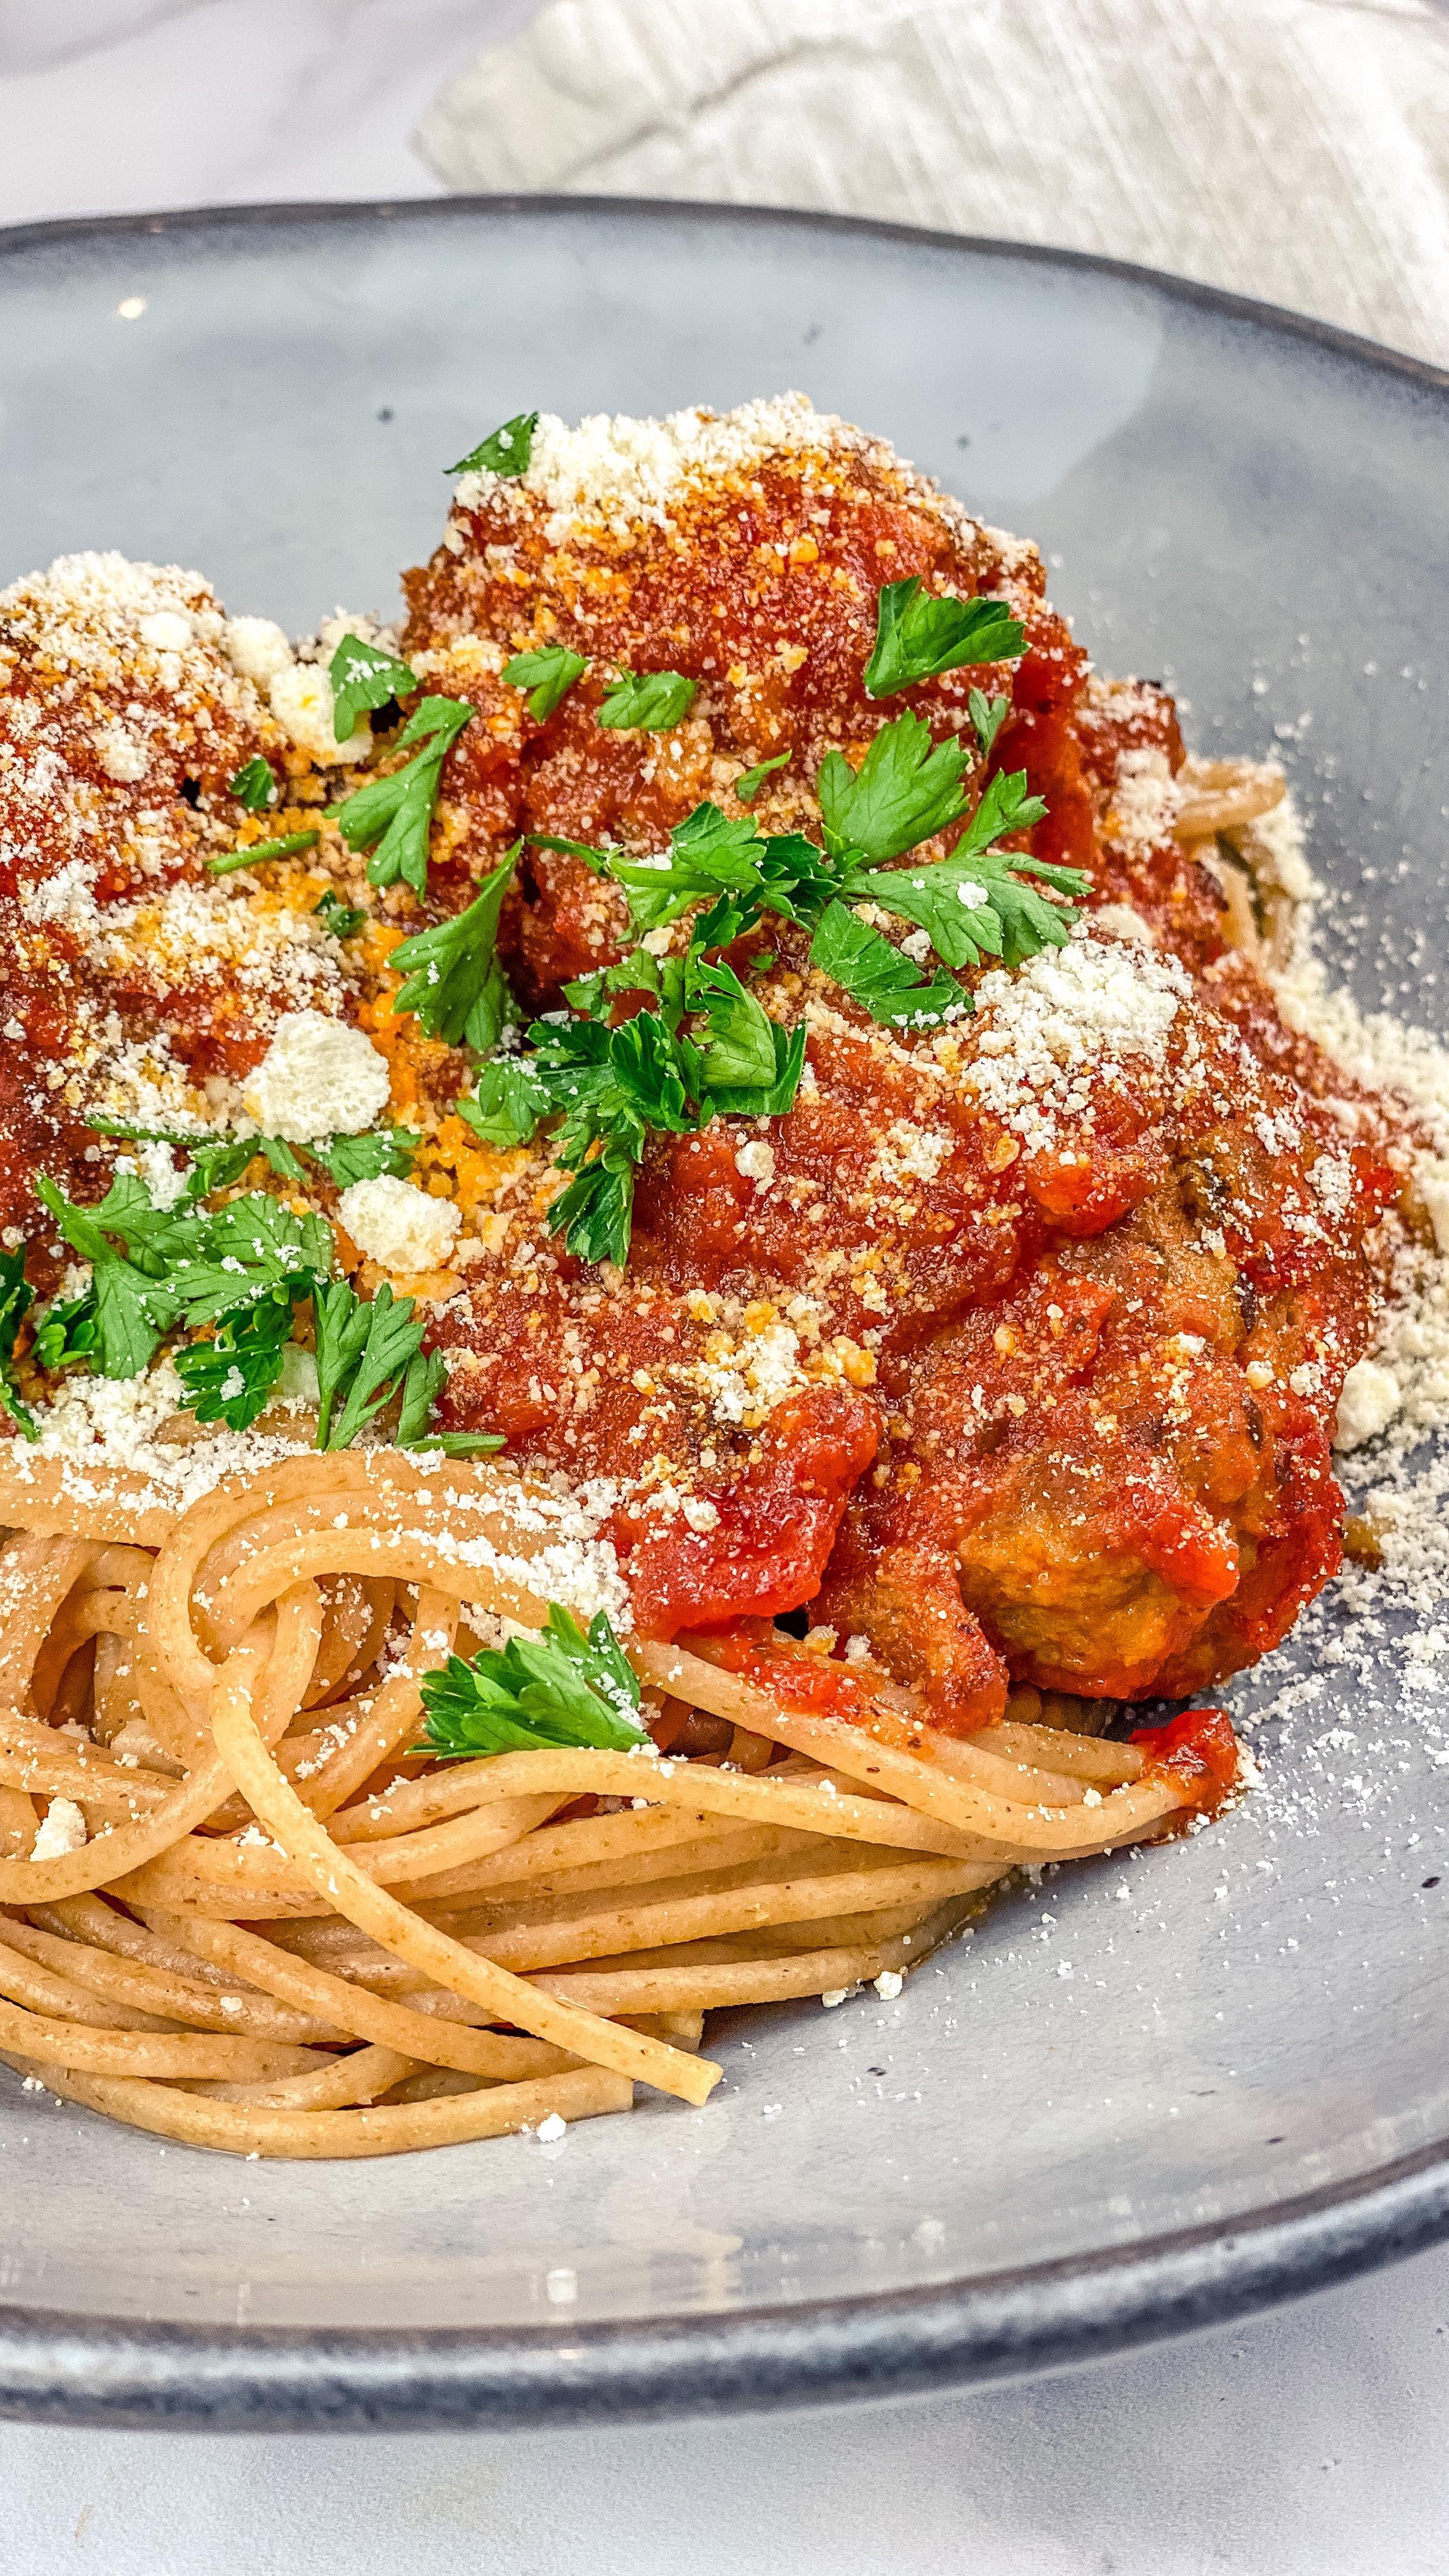 I don’t like to brag but seriously, these hit the mark when it comes to moist, flavorful, and delicious meatballs!! 🤩🍝 This recipe can be the perfect kitchen staple and can be made ahead for weeknight meals or even frozen for later. Trust me, if you're craving some #italian inspired food this is a must have! 
P.S. We've been asked a few times, and my husband makes the best homemade pasta #fromscratch....so that is coming very very soon. 🙌🏻

LINK: https://simplysellskitchen.com/meatballs/

#meatballs #spaghetti #spaghettiandmeatballs #homemadewithlove #homemadefood #homemademeatballs #raos #meat #meateaters #foodblogeats #parmesan #porkmeatballs #pork #feedfeed #foodie #sarasotafoodie #yummyfood #yummy #deliciousfood #saycheese @thefeedfeed @foodblogfeed